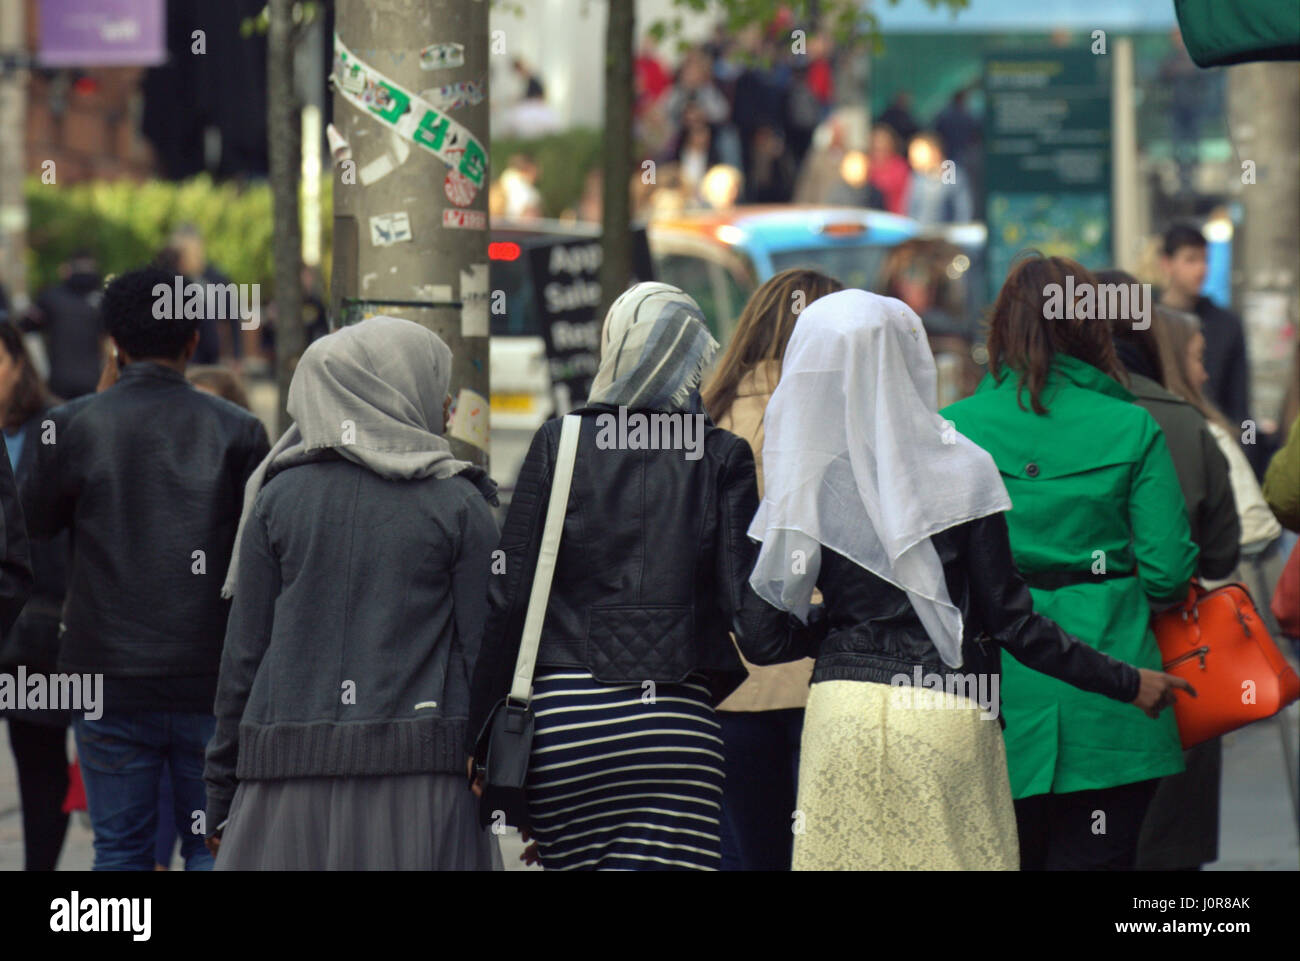 Asian African refugee dressed Hijab scarf on street in the UK everyday scene  three young girls walking in crowd Stock Photo